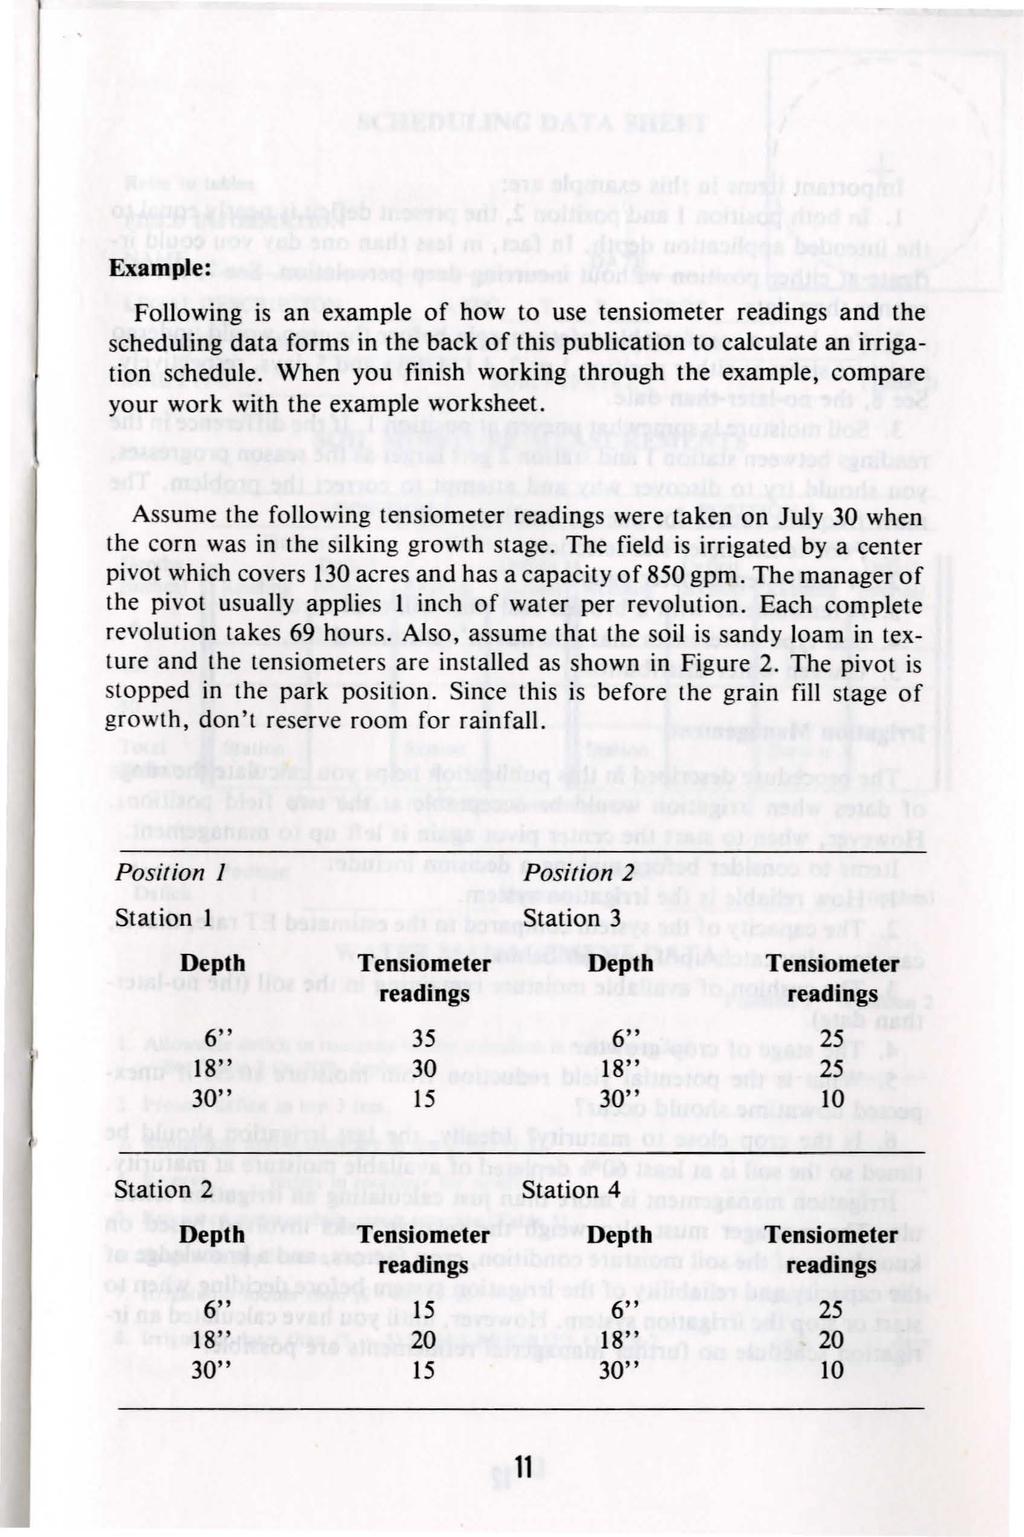 Example: Following is an example of how to use tensiometer readings and the scheduling data forms in the back of this publication to calculate an irrigation schedule.